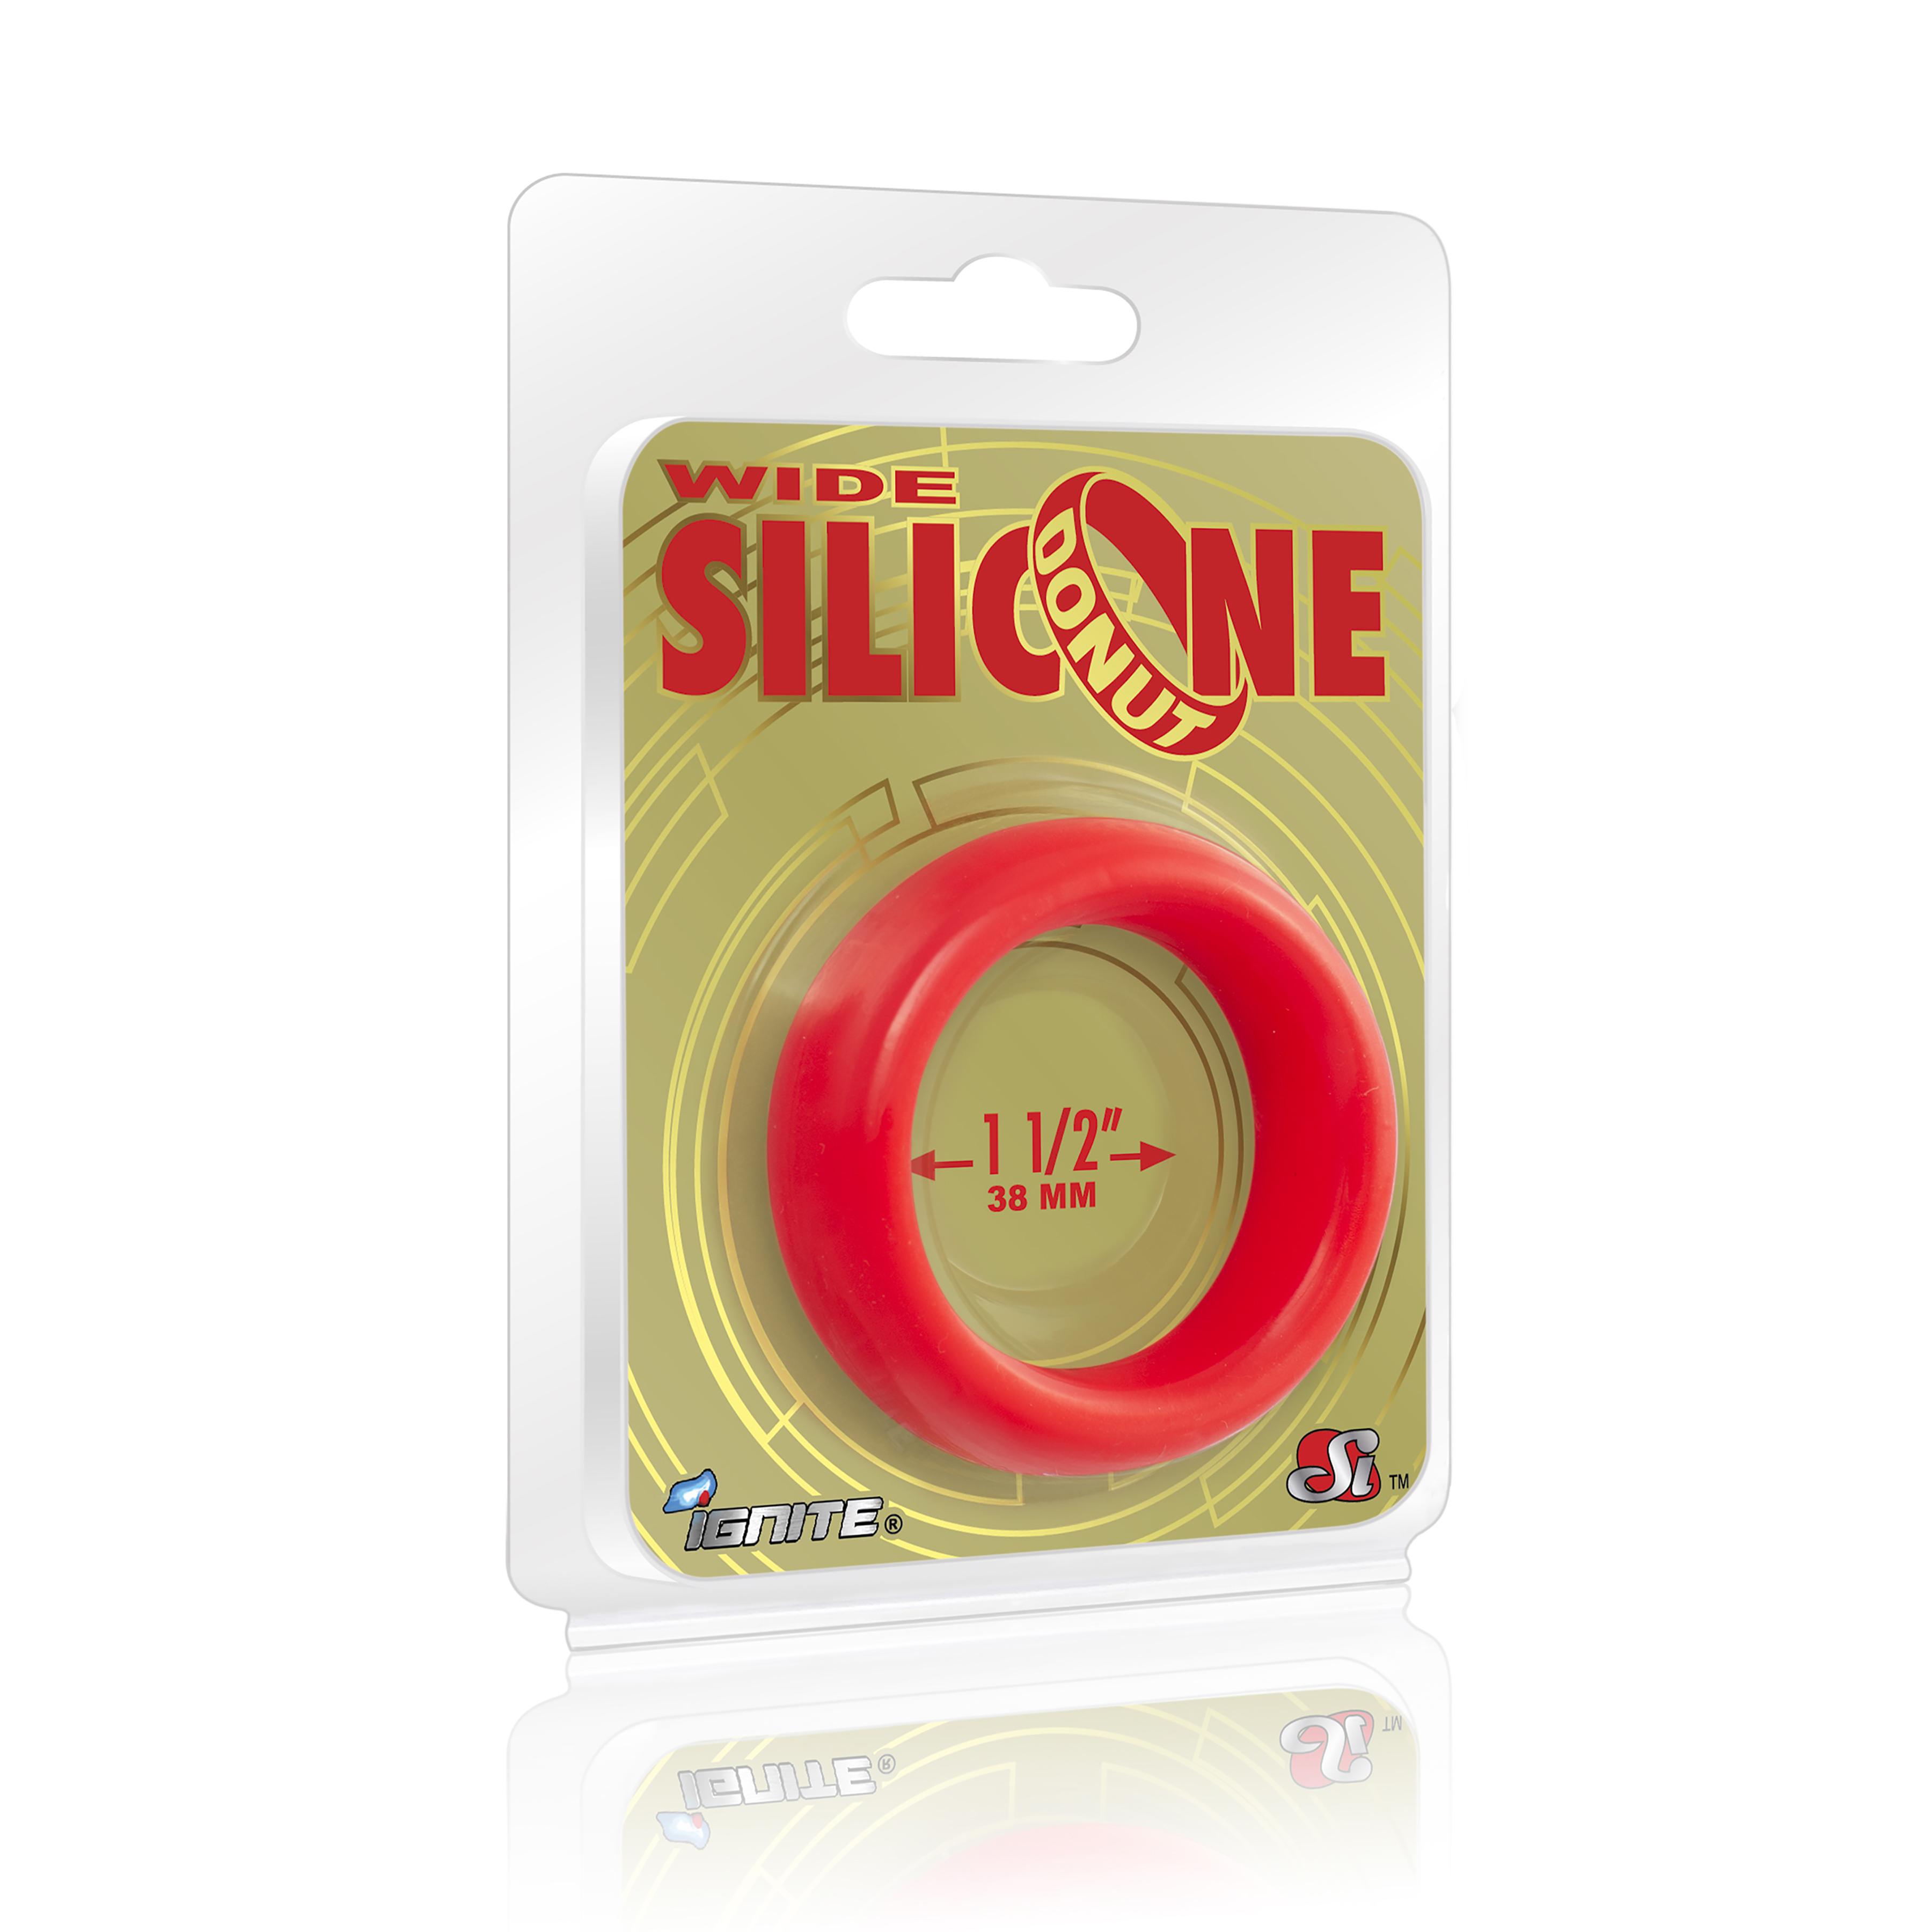 SI IGNITE Wide Silicone Donut Cockring, ¯ 38 mm, Red